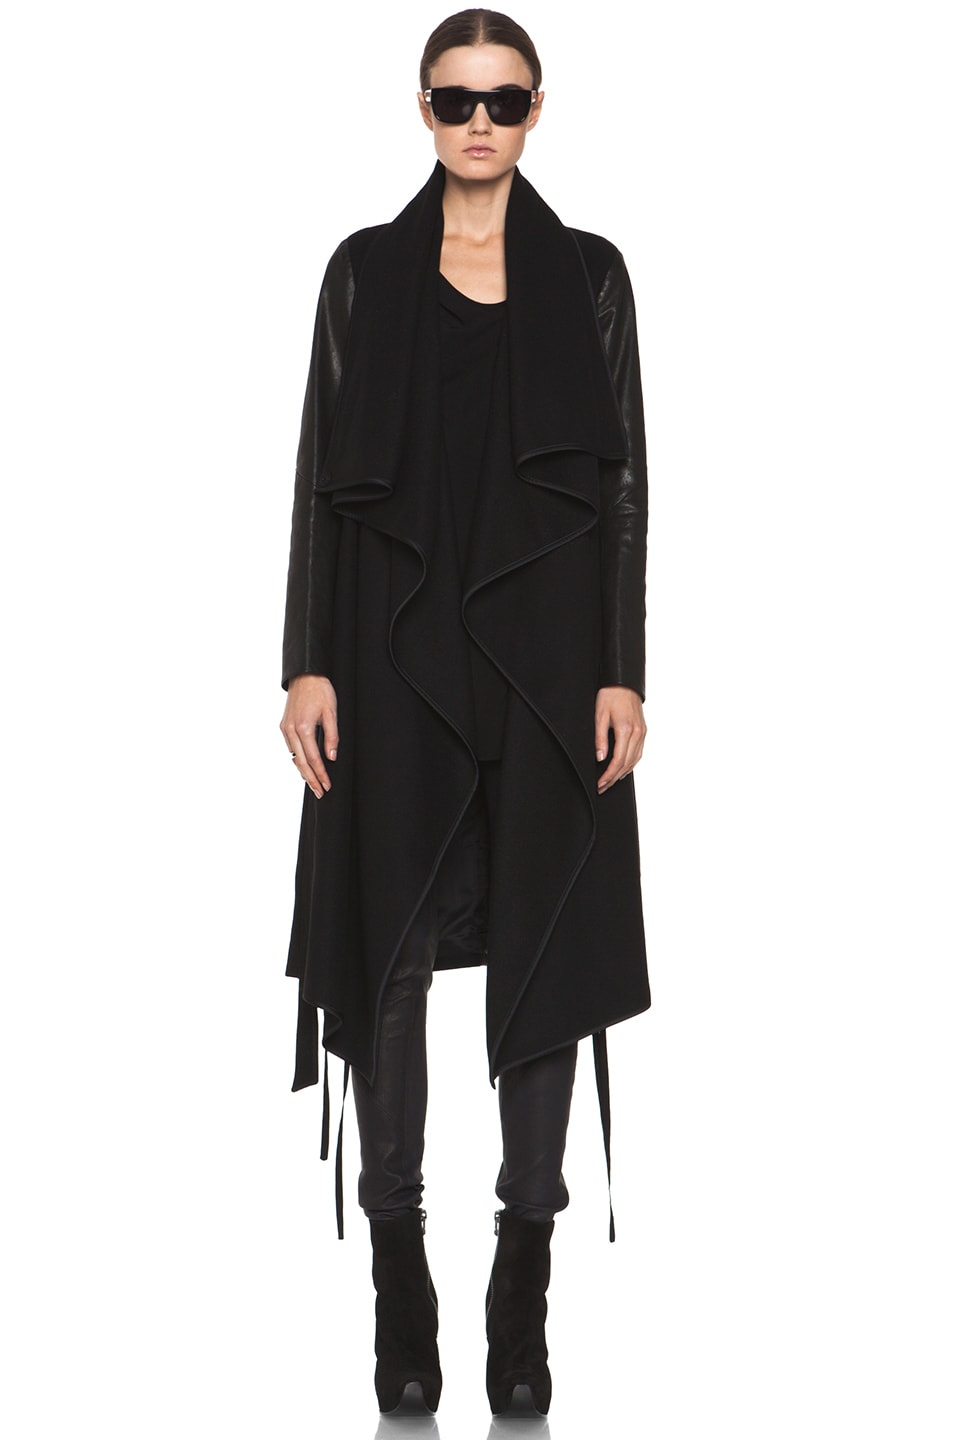 Image 1 of Tess Giberson Drape Coat with Leather in Black